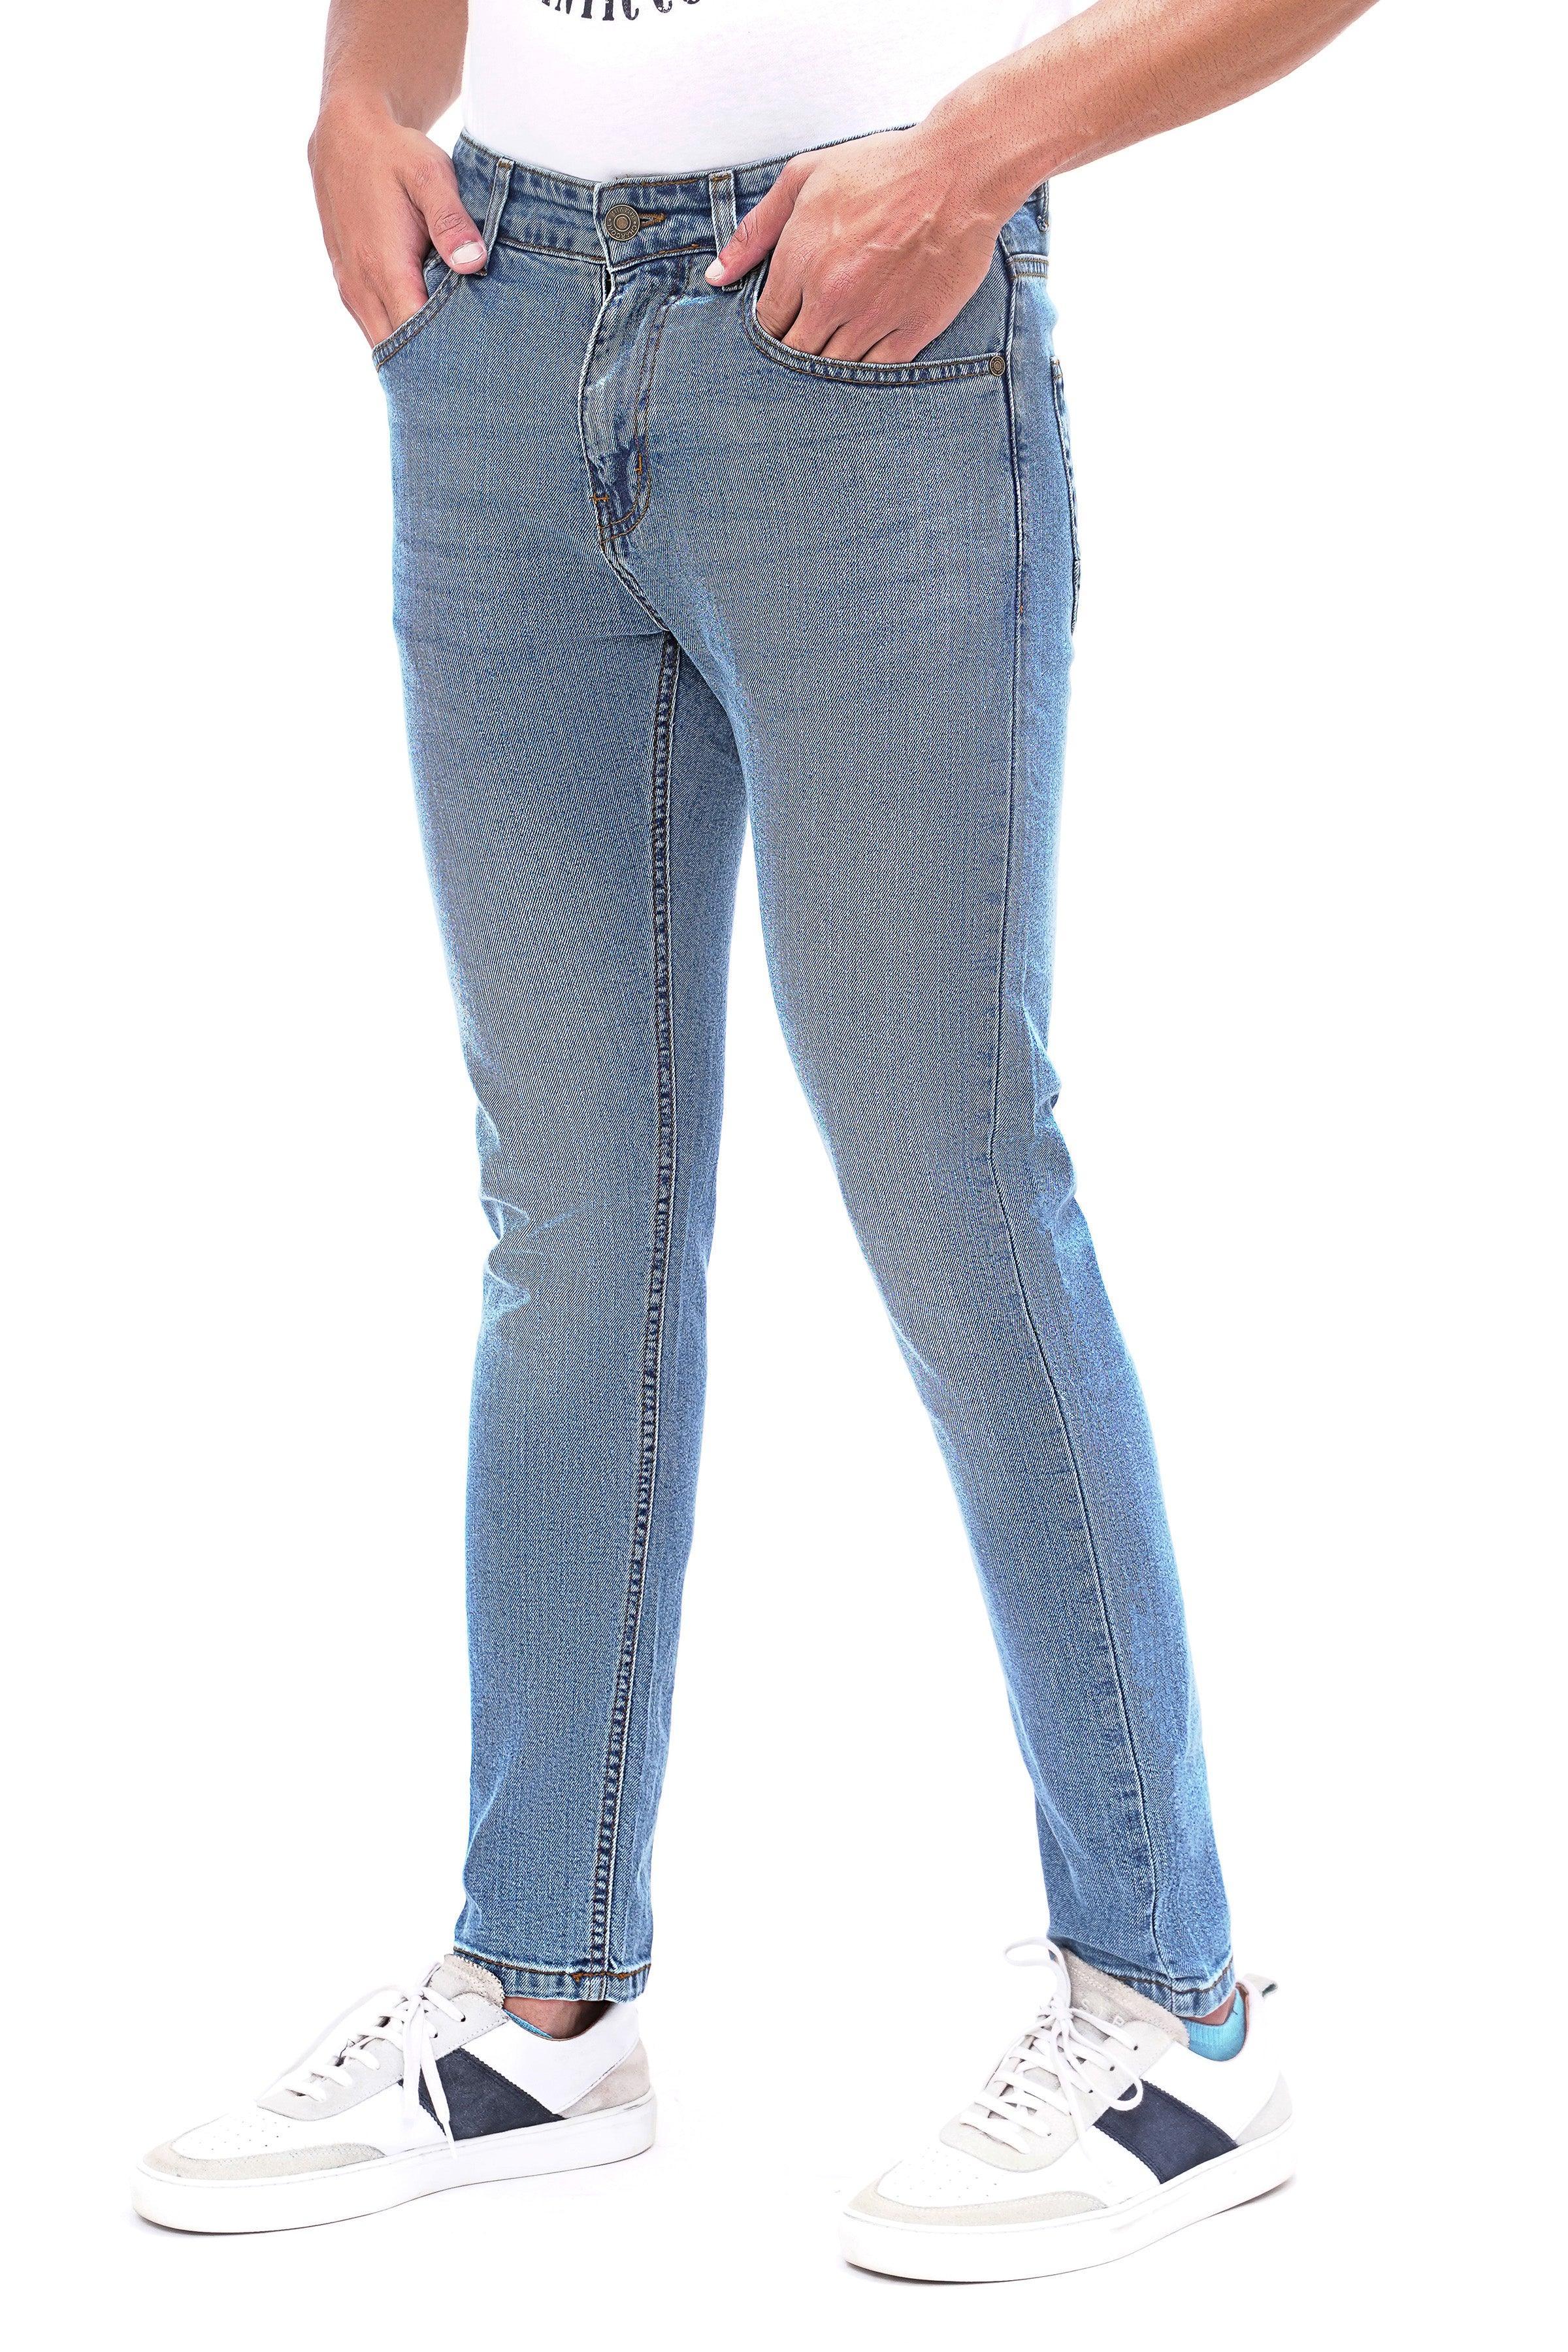 JEANS LIGHT BLUE at Charcoal Clothing